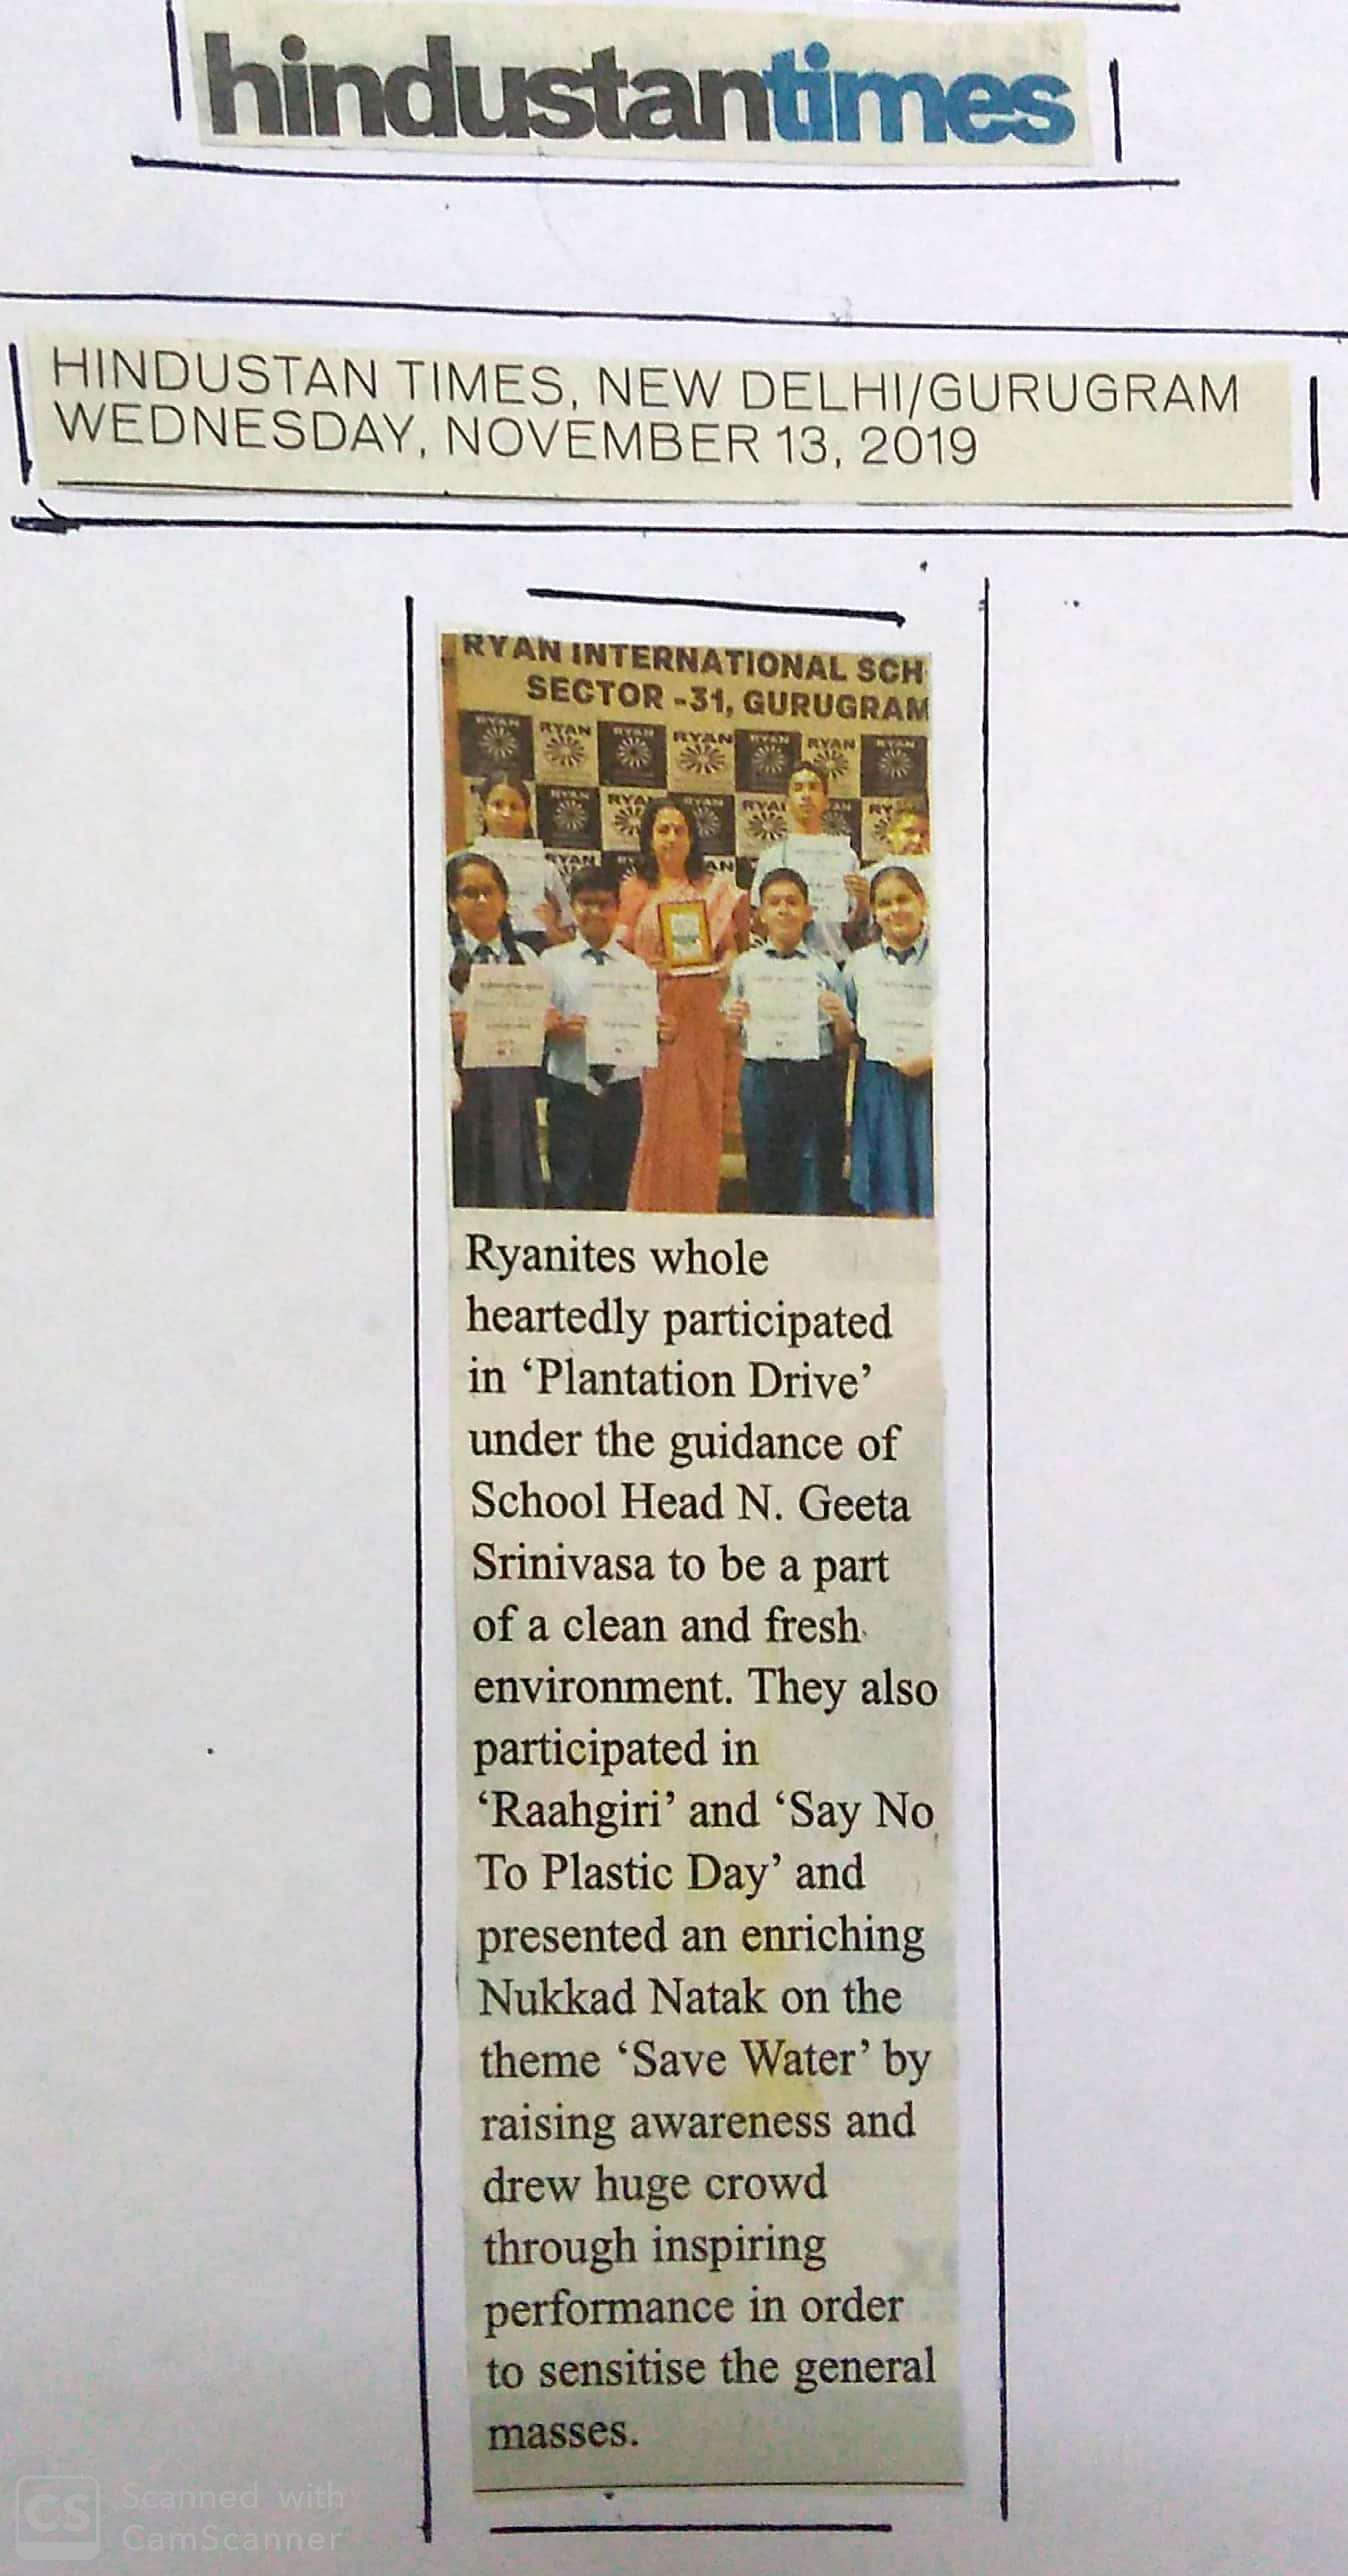 Ryanites wholeheartedly participated in Plantation Drive to be a part of a clean environment - Ryan International School, Sec 31 Gurgaon